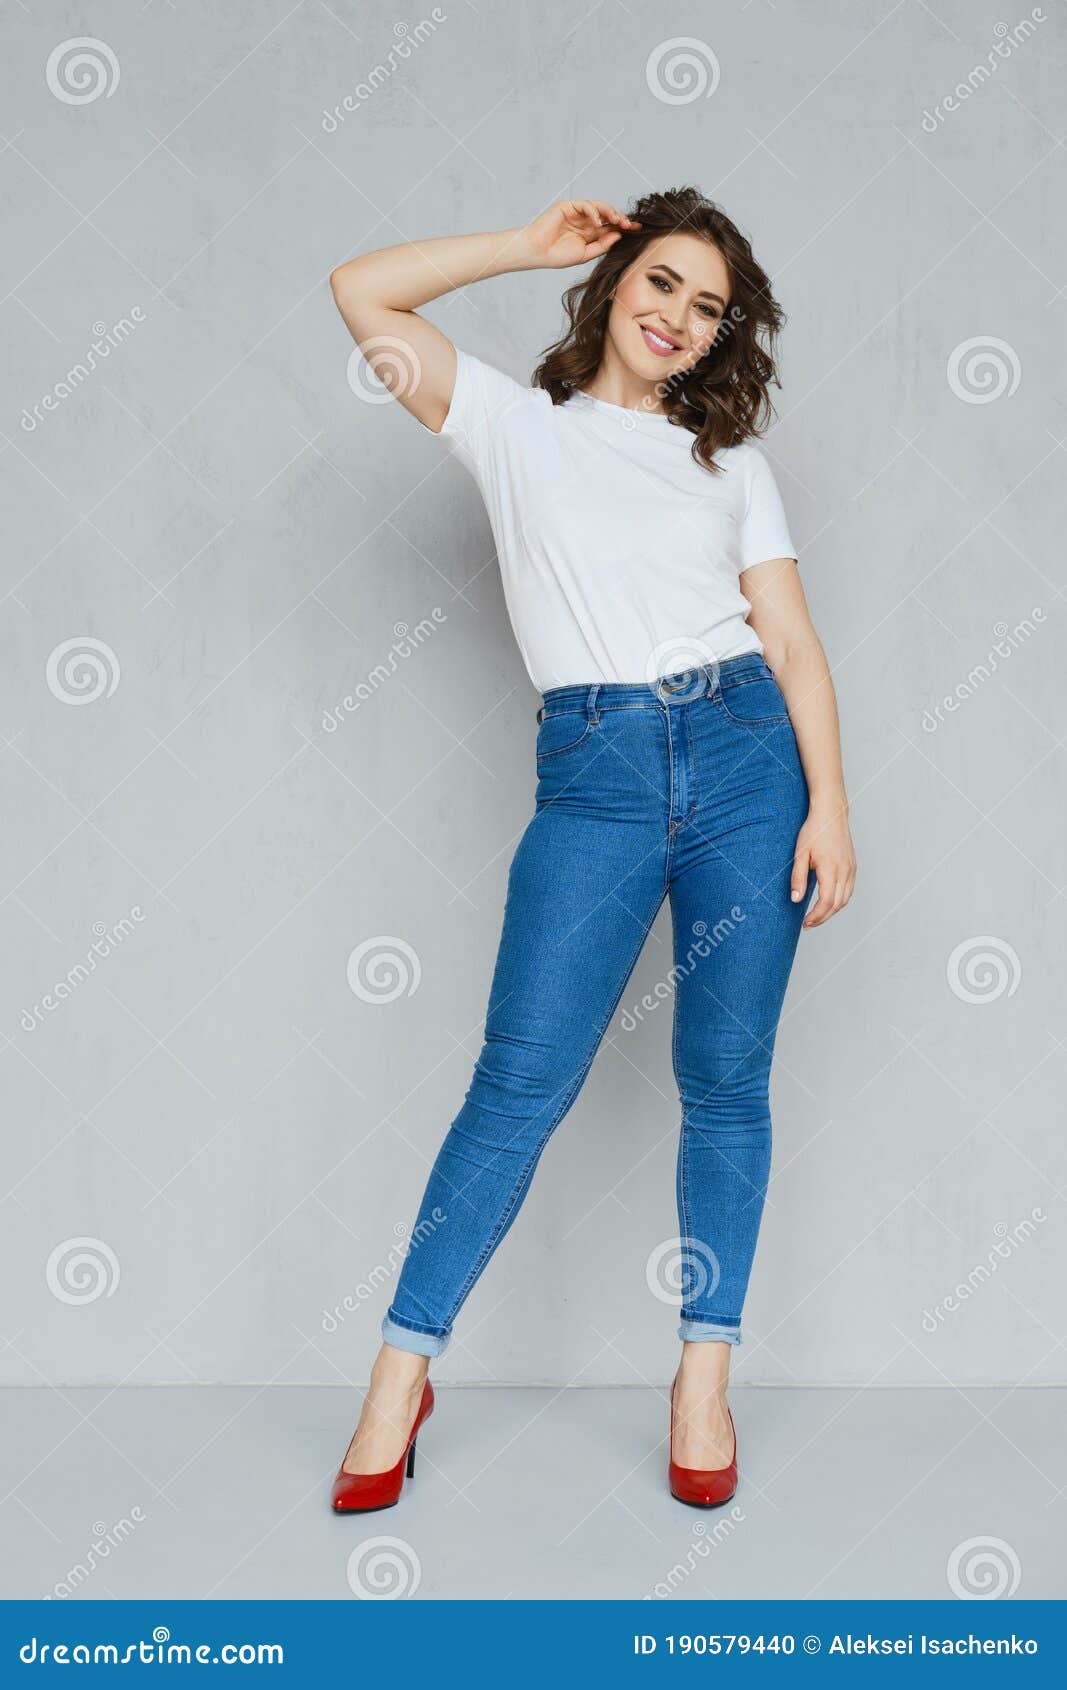 Pretty Athletic Woman Jeans Strikes Pose Stock Photo 467910761   Shutterstock